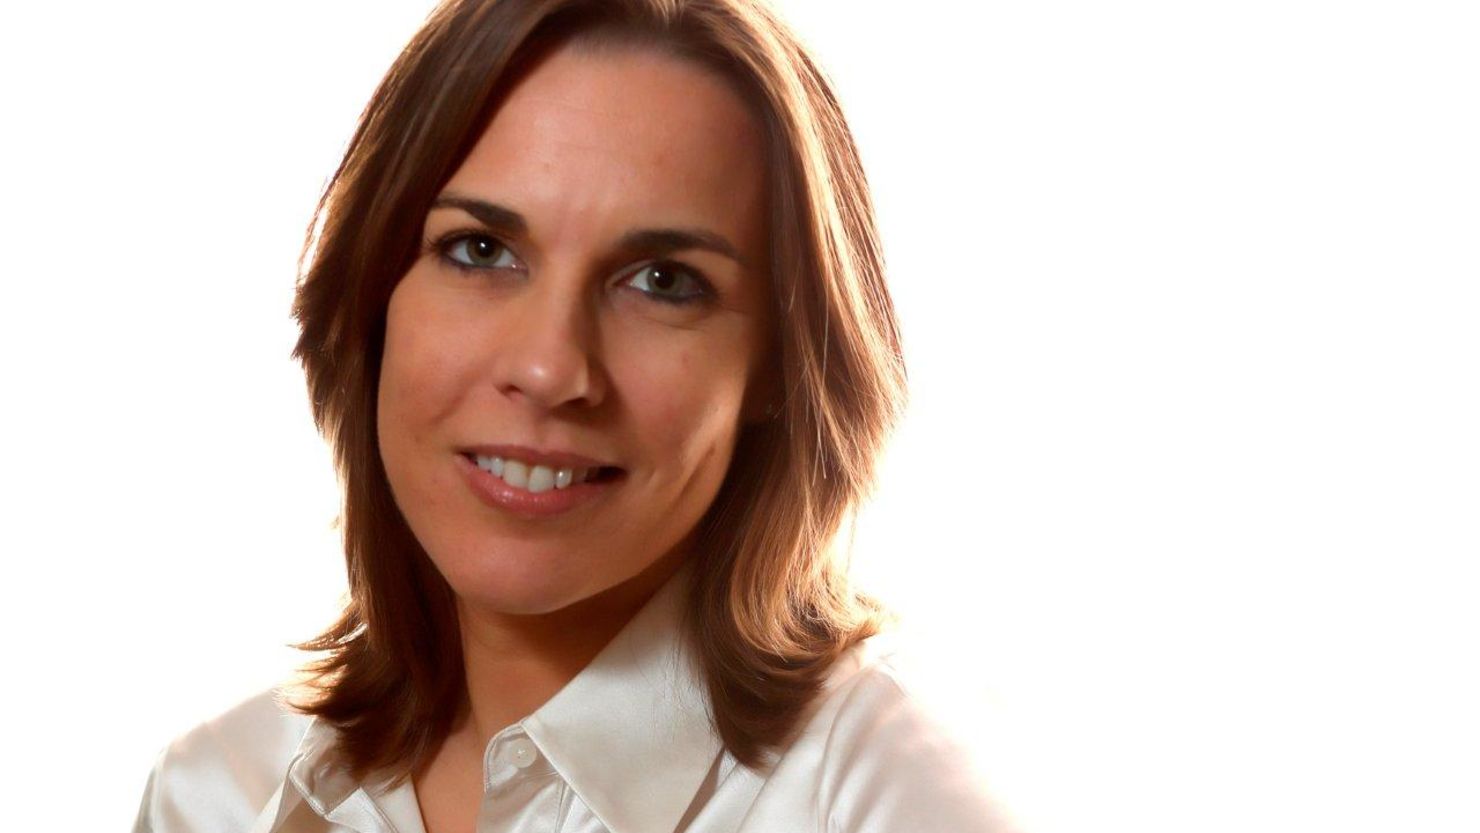 Claire Williams is the daughter of team founder Frank Williams.